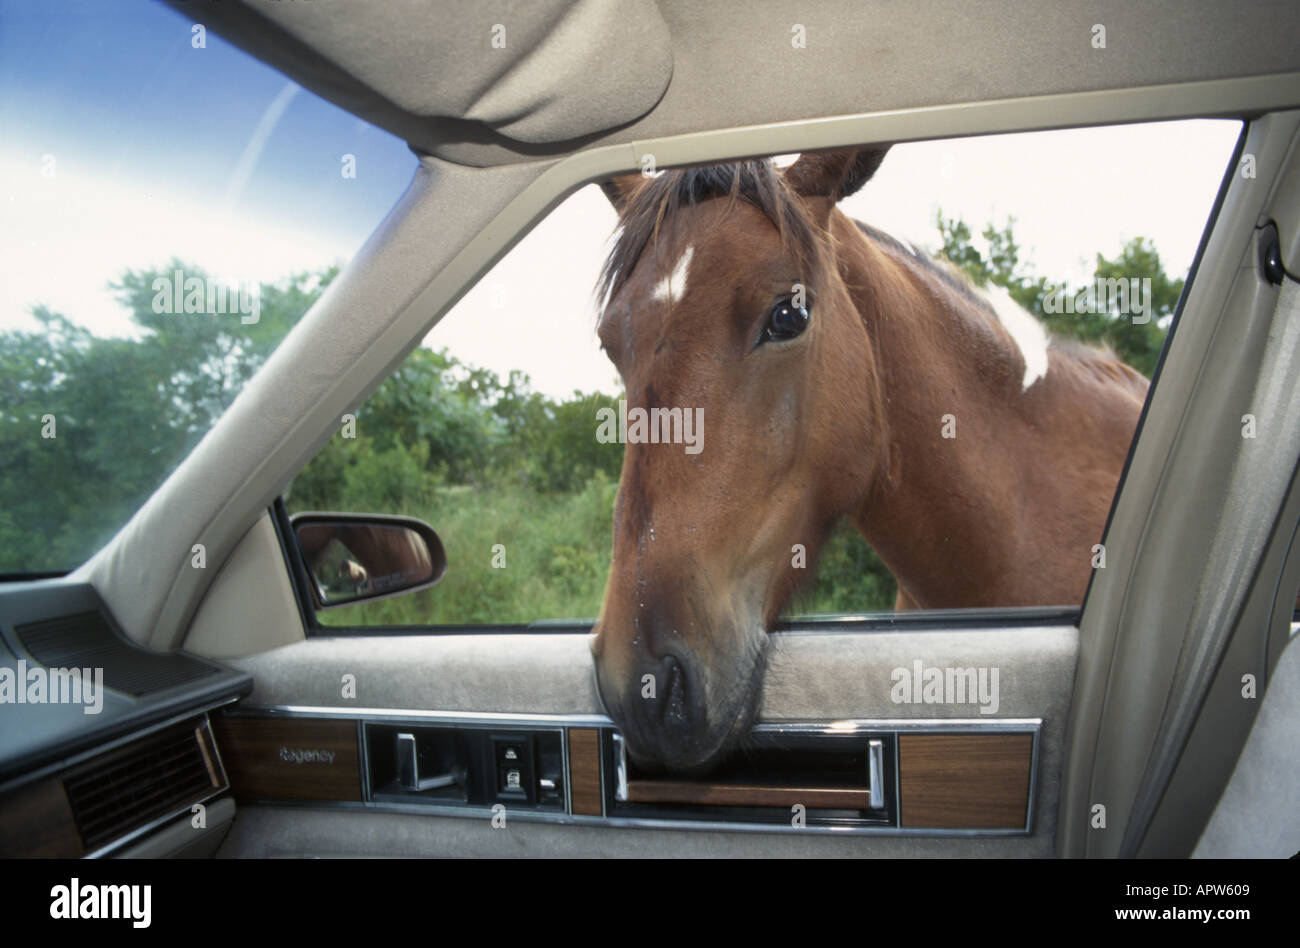 Maryland,MD,Mid Atlantic,Old Line State,Assateague Island State Park,public land,recreation,Bayberry Drive,wild pony,animal,equine,nature,car window,M Stock Photo